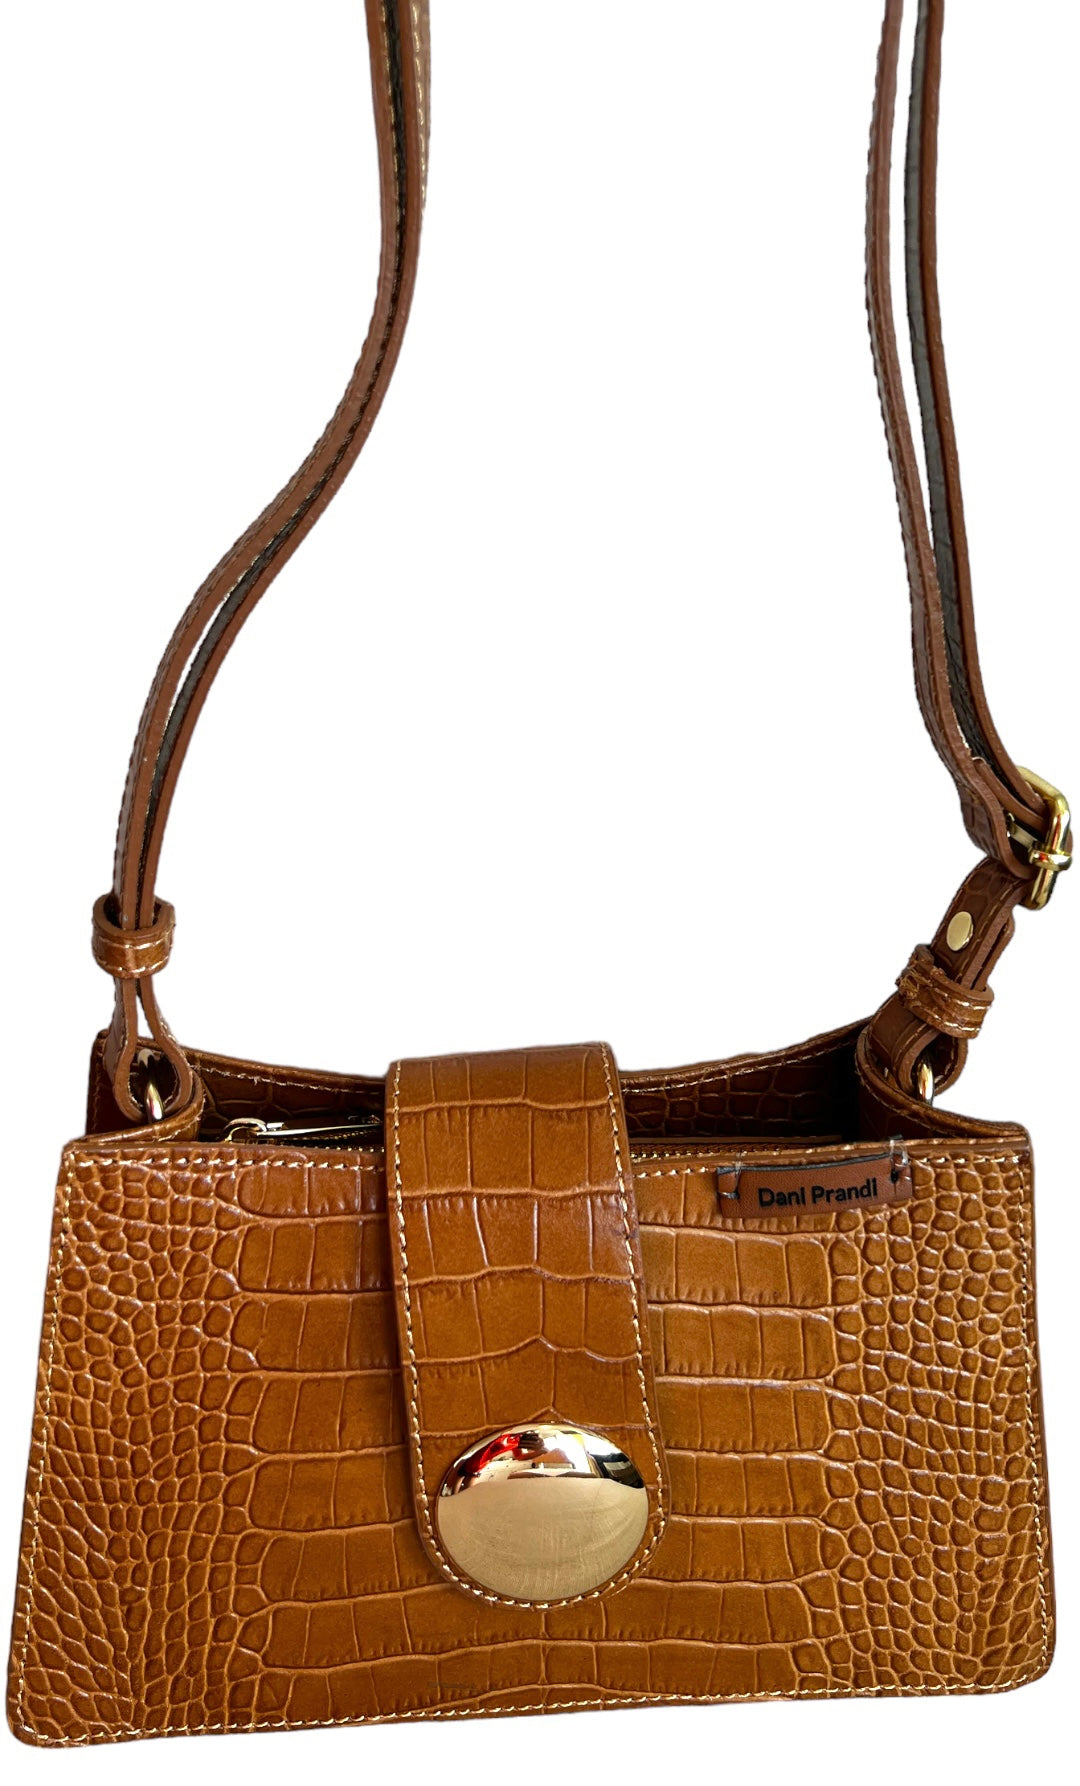 This is a sophisticated genuine leather shoulder bag handbag, a timeless accessory crafted with the finest materials. The bag features a classic design in medium brown, providing both elegance and versatility. With an adjustable shoulder strap and secure zip closure, it seamlessly combines style and practicality.